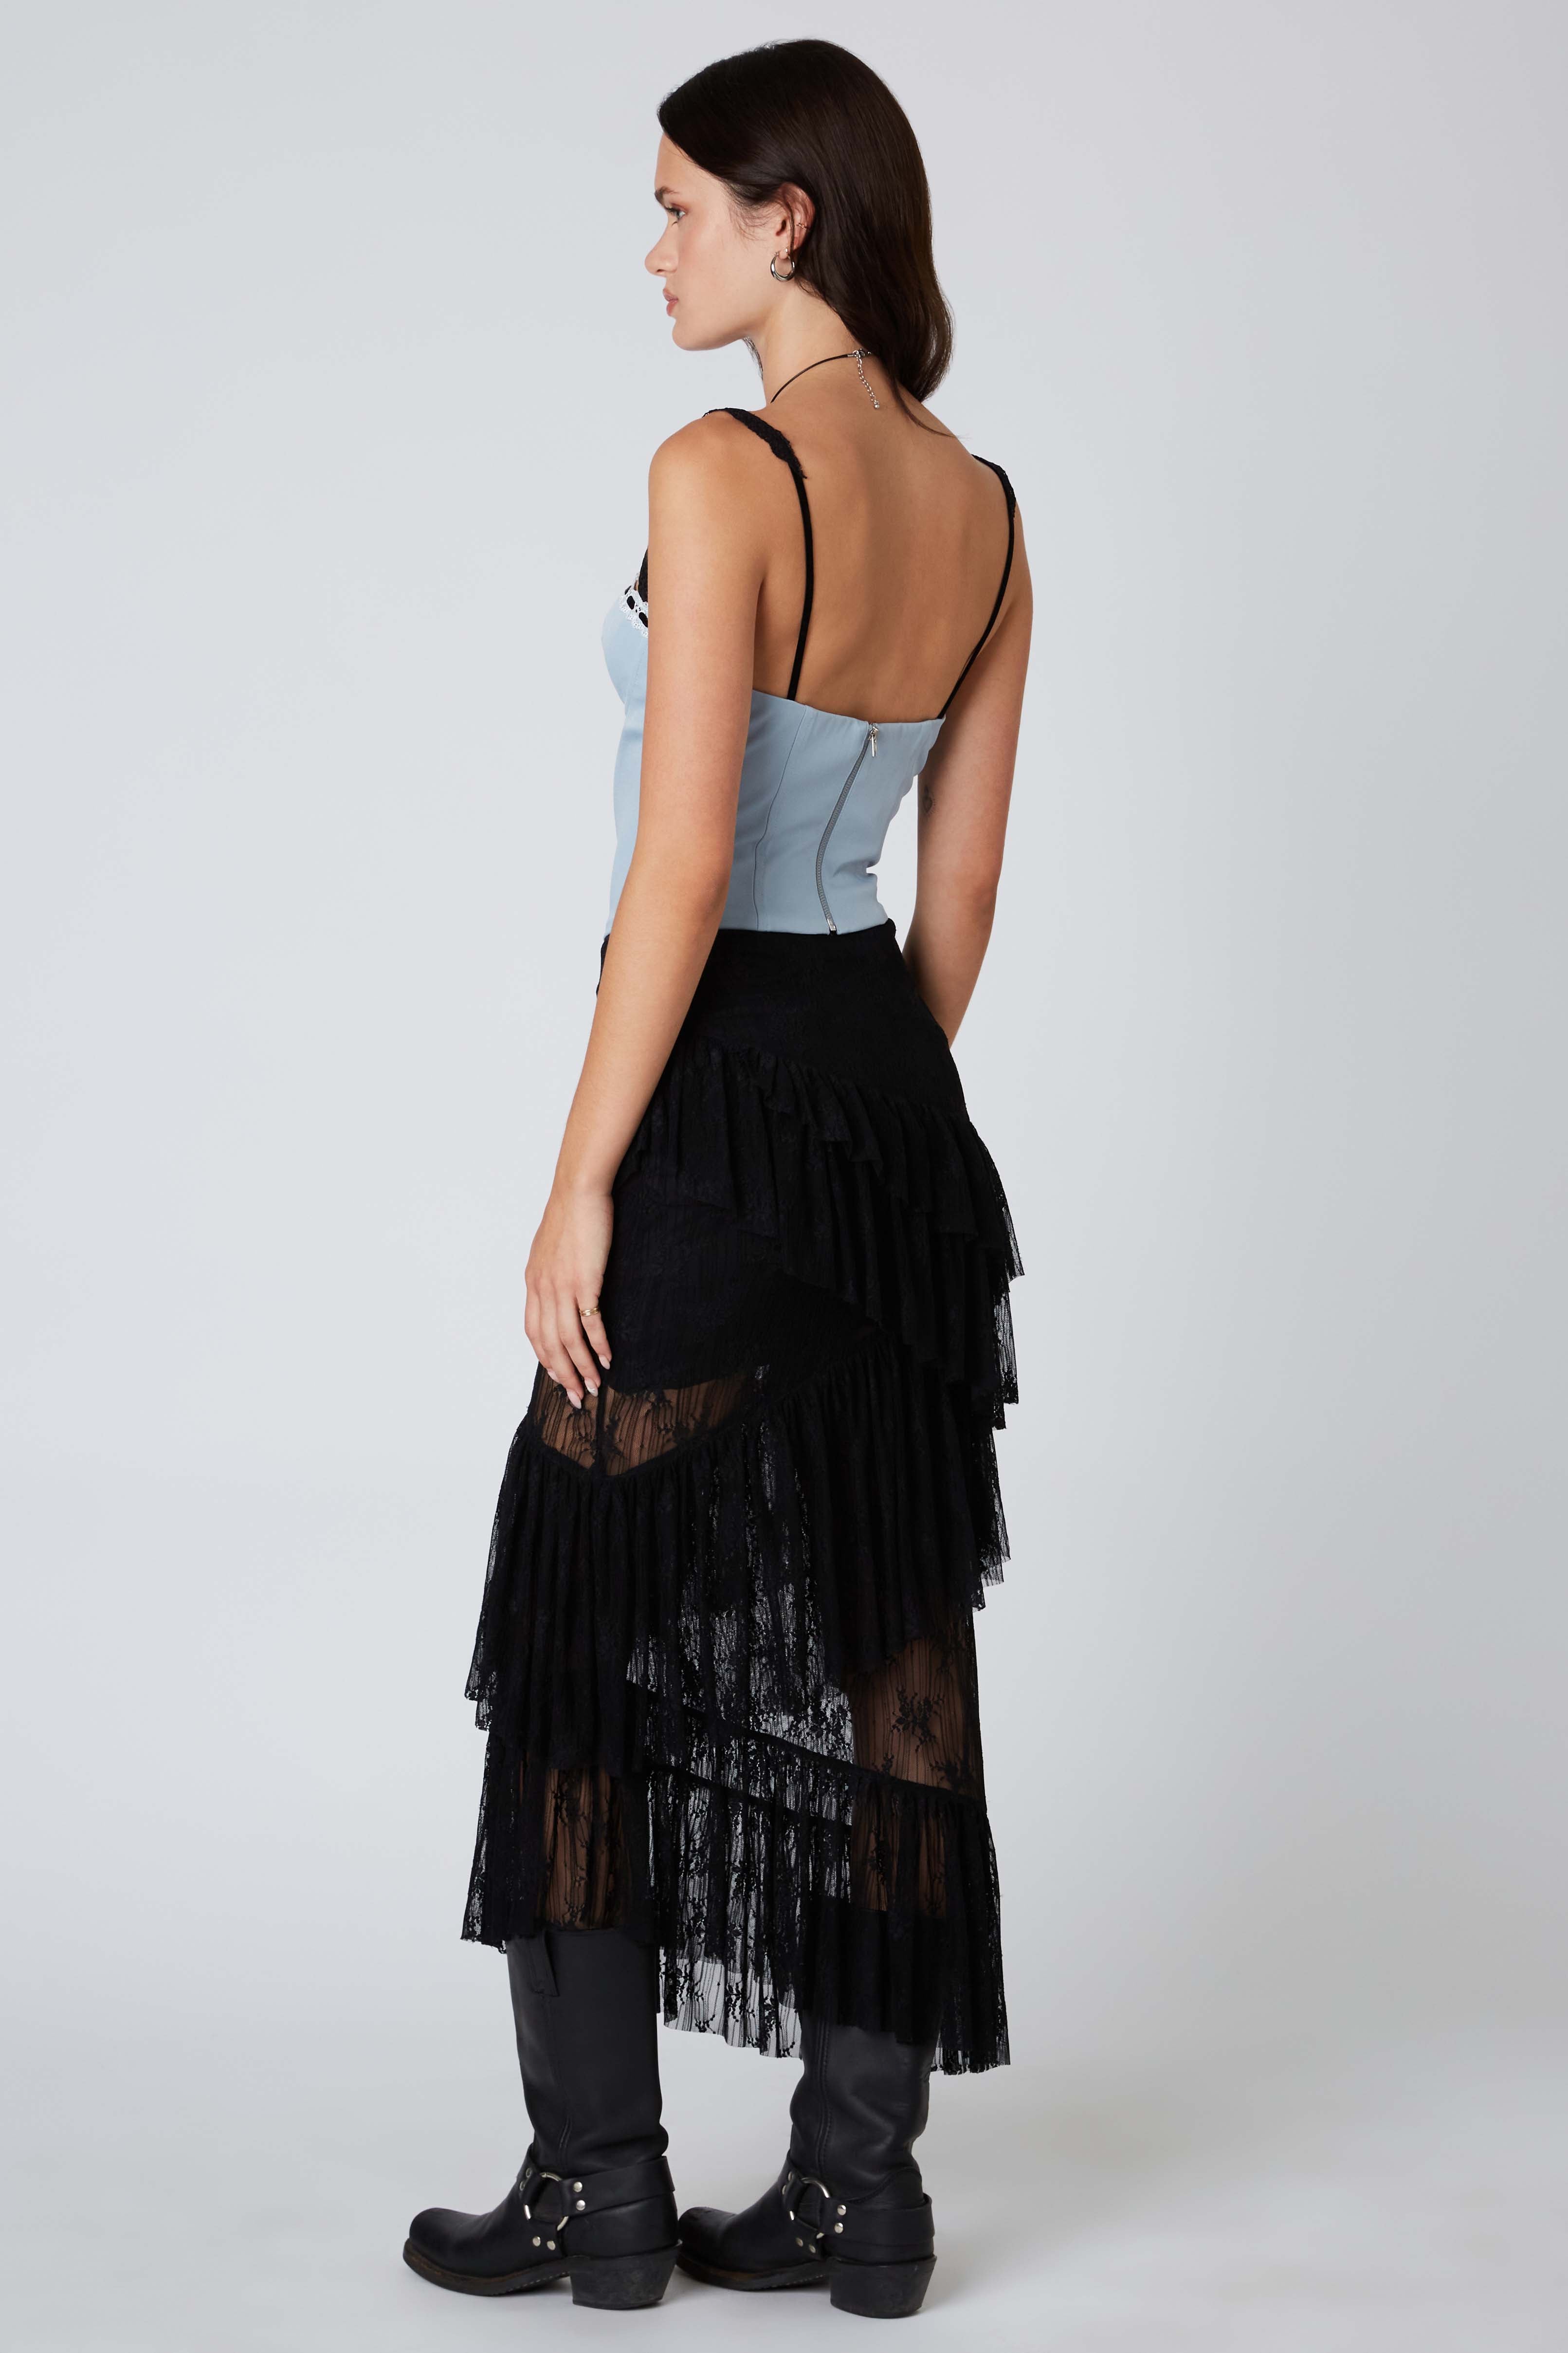 Lace midi Skirt in Black Back View